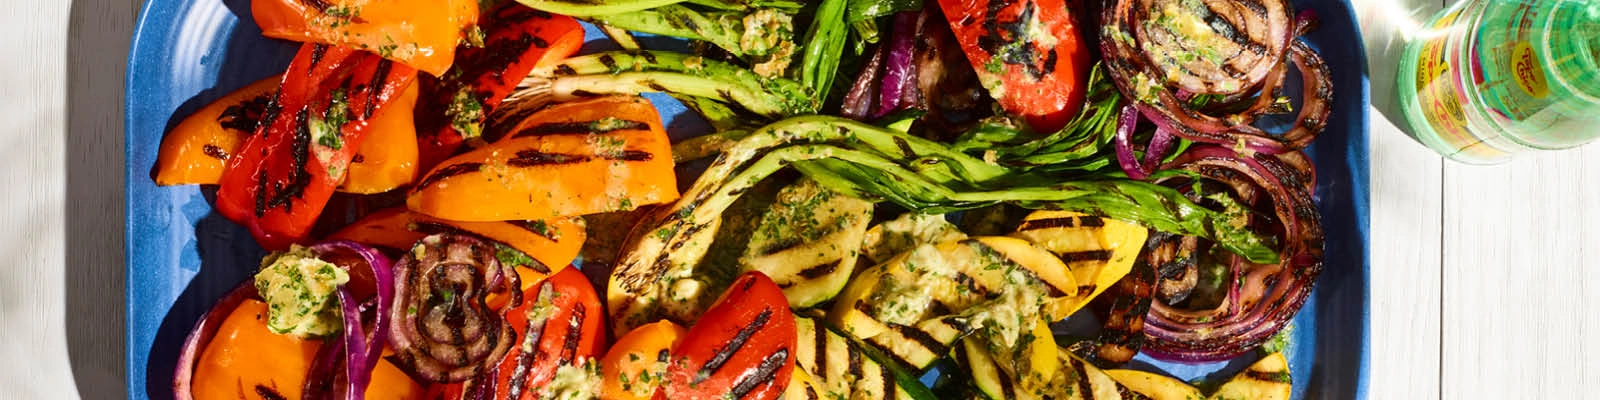 Grilled Mixed Vegetables with Caper-Lemon Compound Butter